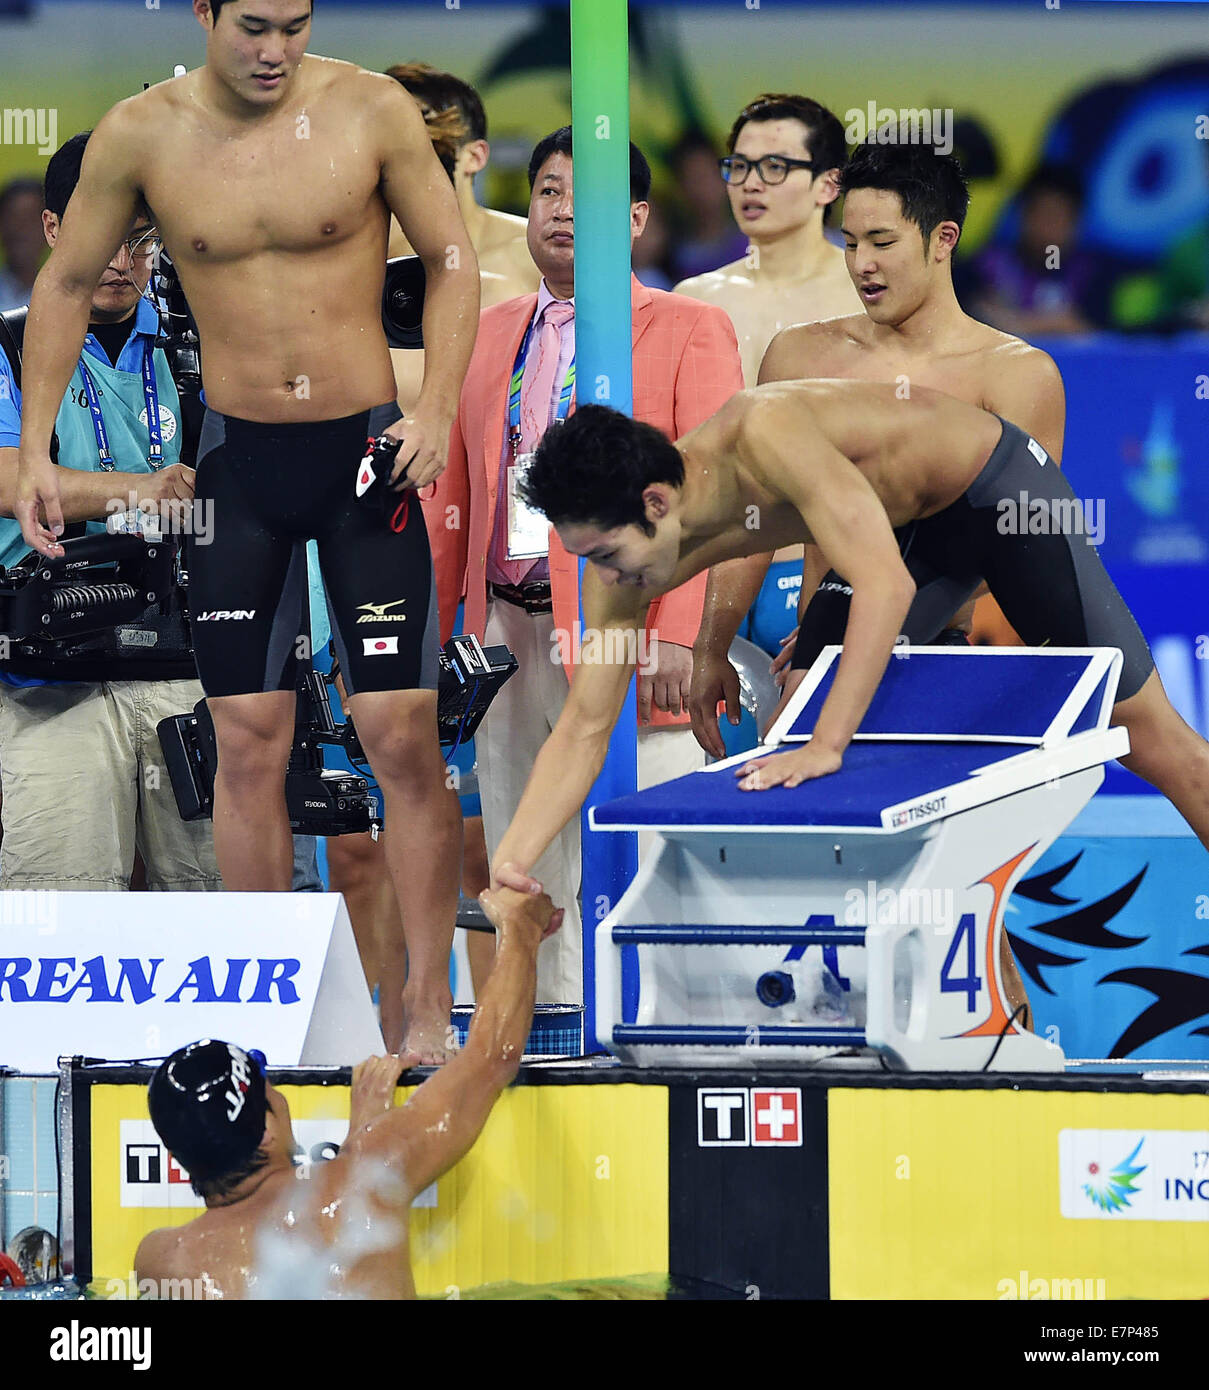 Incheon, South Korea. 22nd Sep, 2014. Japanese swimmers celebrate after the men's 4×200m freestyle relay final of swimming event at the 17th Asian Games in Incheon, South Korea, Sept. 22, 2014. Japan won the gold medal with 7 minutes and 06.74 seconds. Credit:  Wang Peng/Xinhua/Alamy Live News Stock Photo